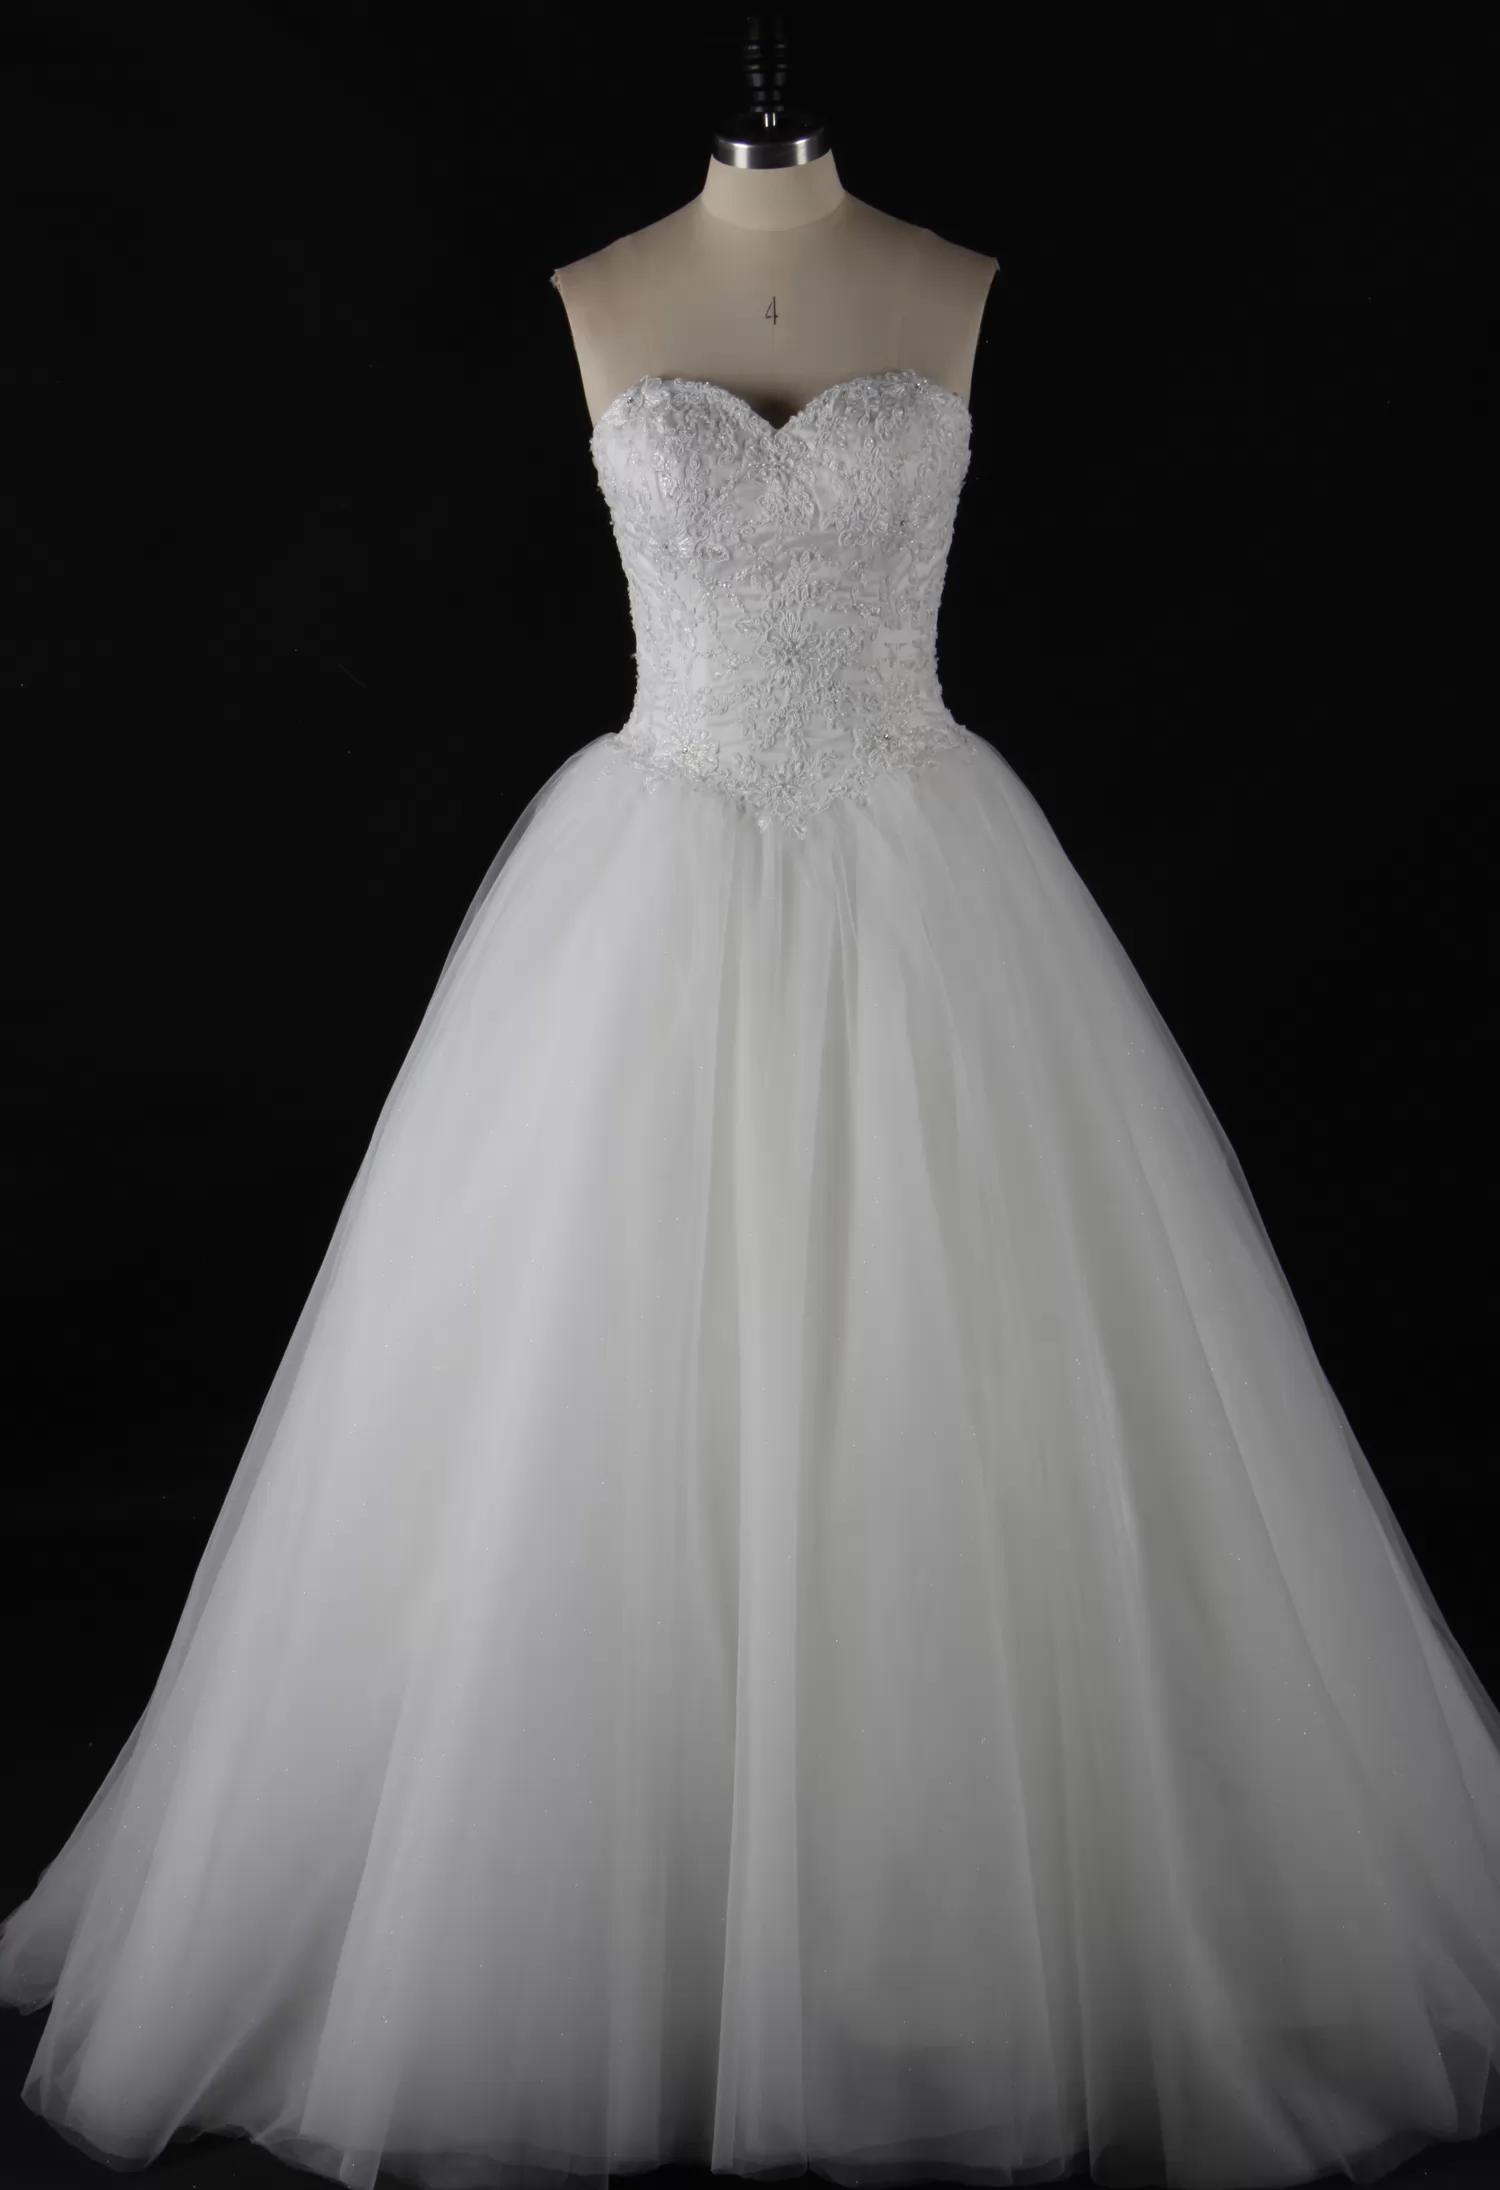 Strapless Beaded Lace Ball Gown With Corset Bodice